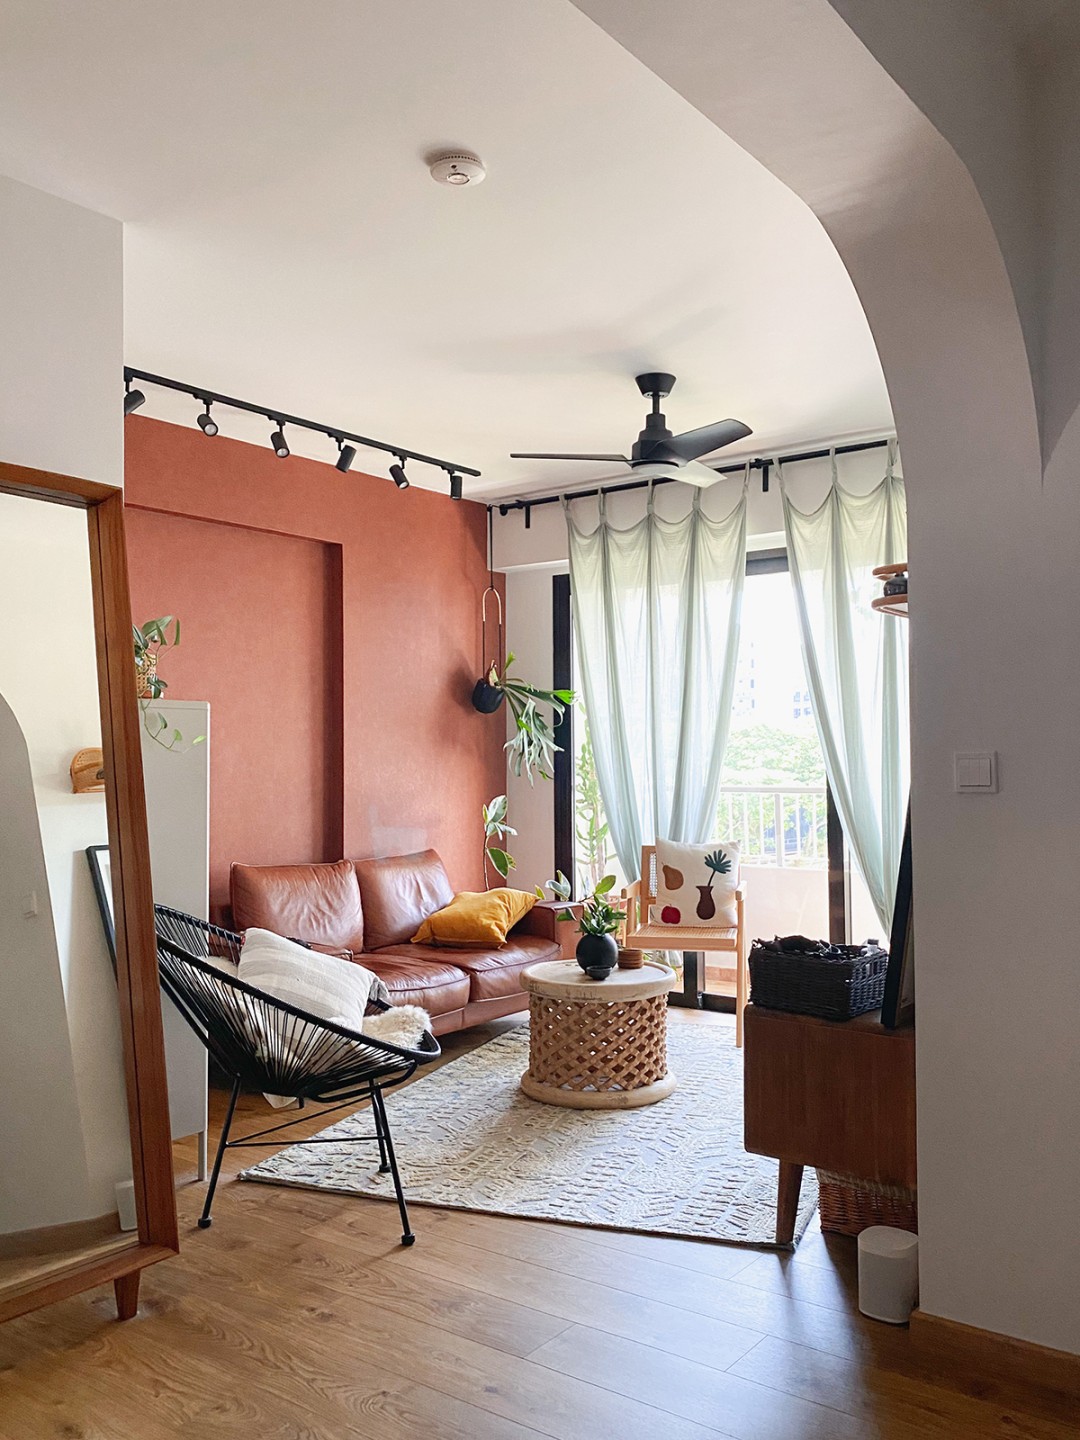 squarerooms cnbrr home fazlie corinne instagram bto flat account hdb homeowners interview singapore canberra mediterranean inspired design apartment style living room terracotta red wall